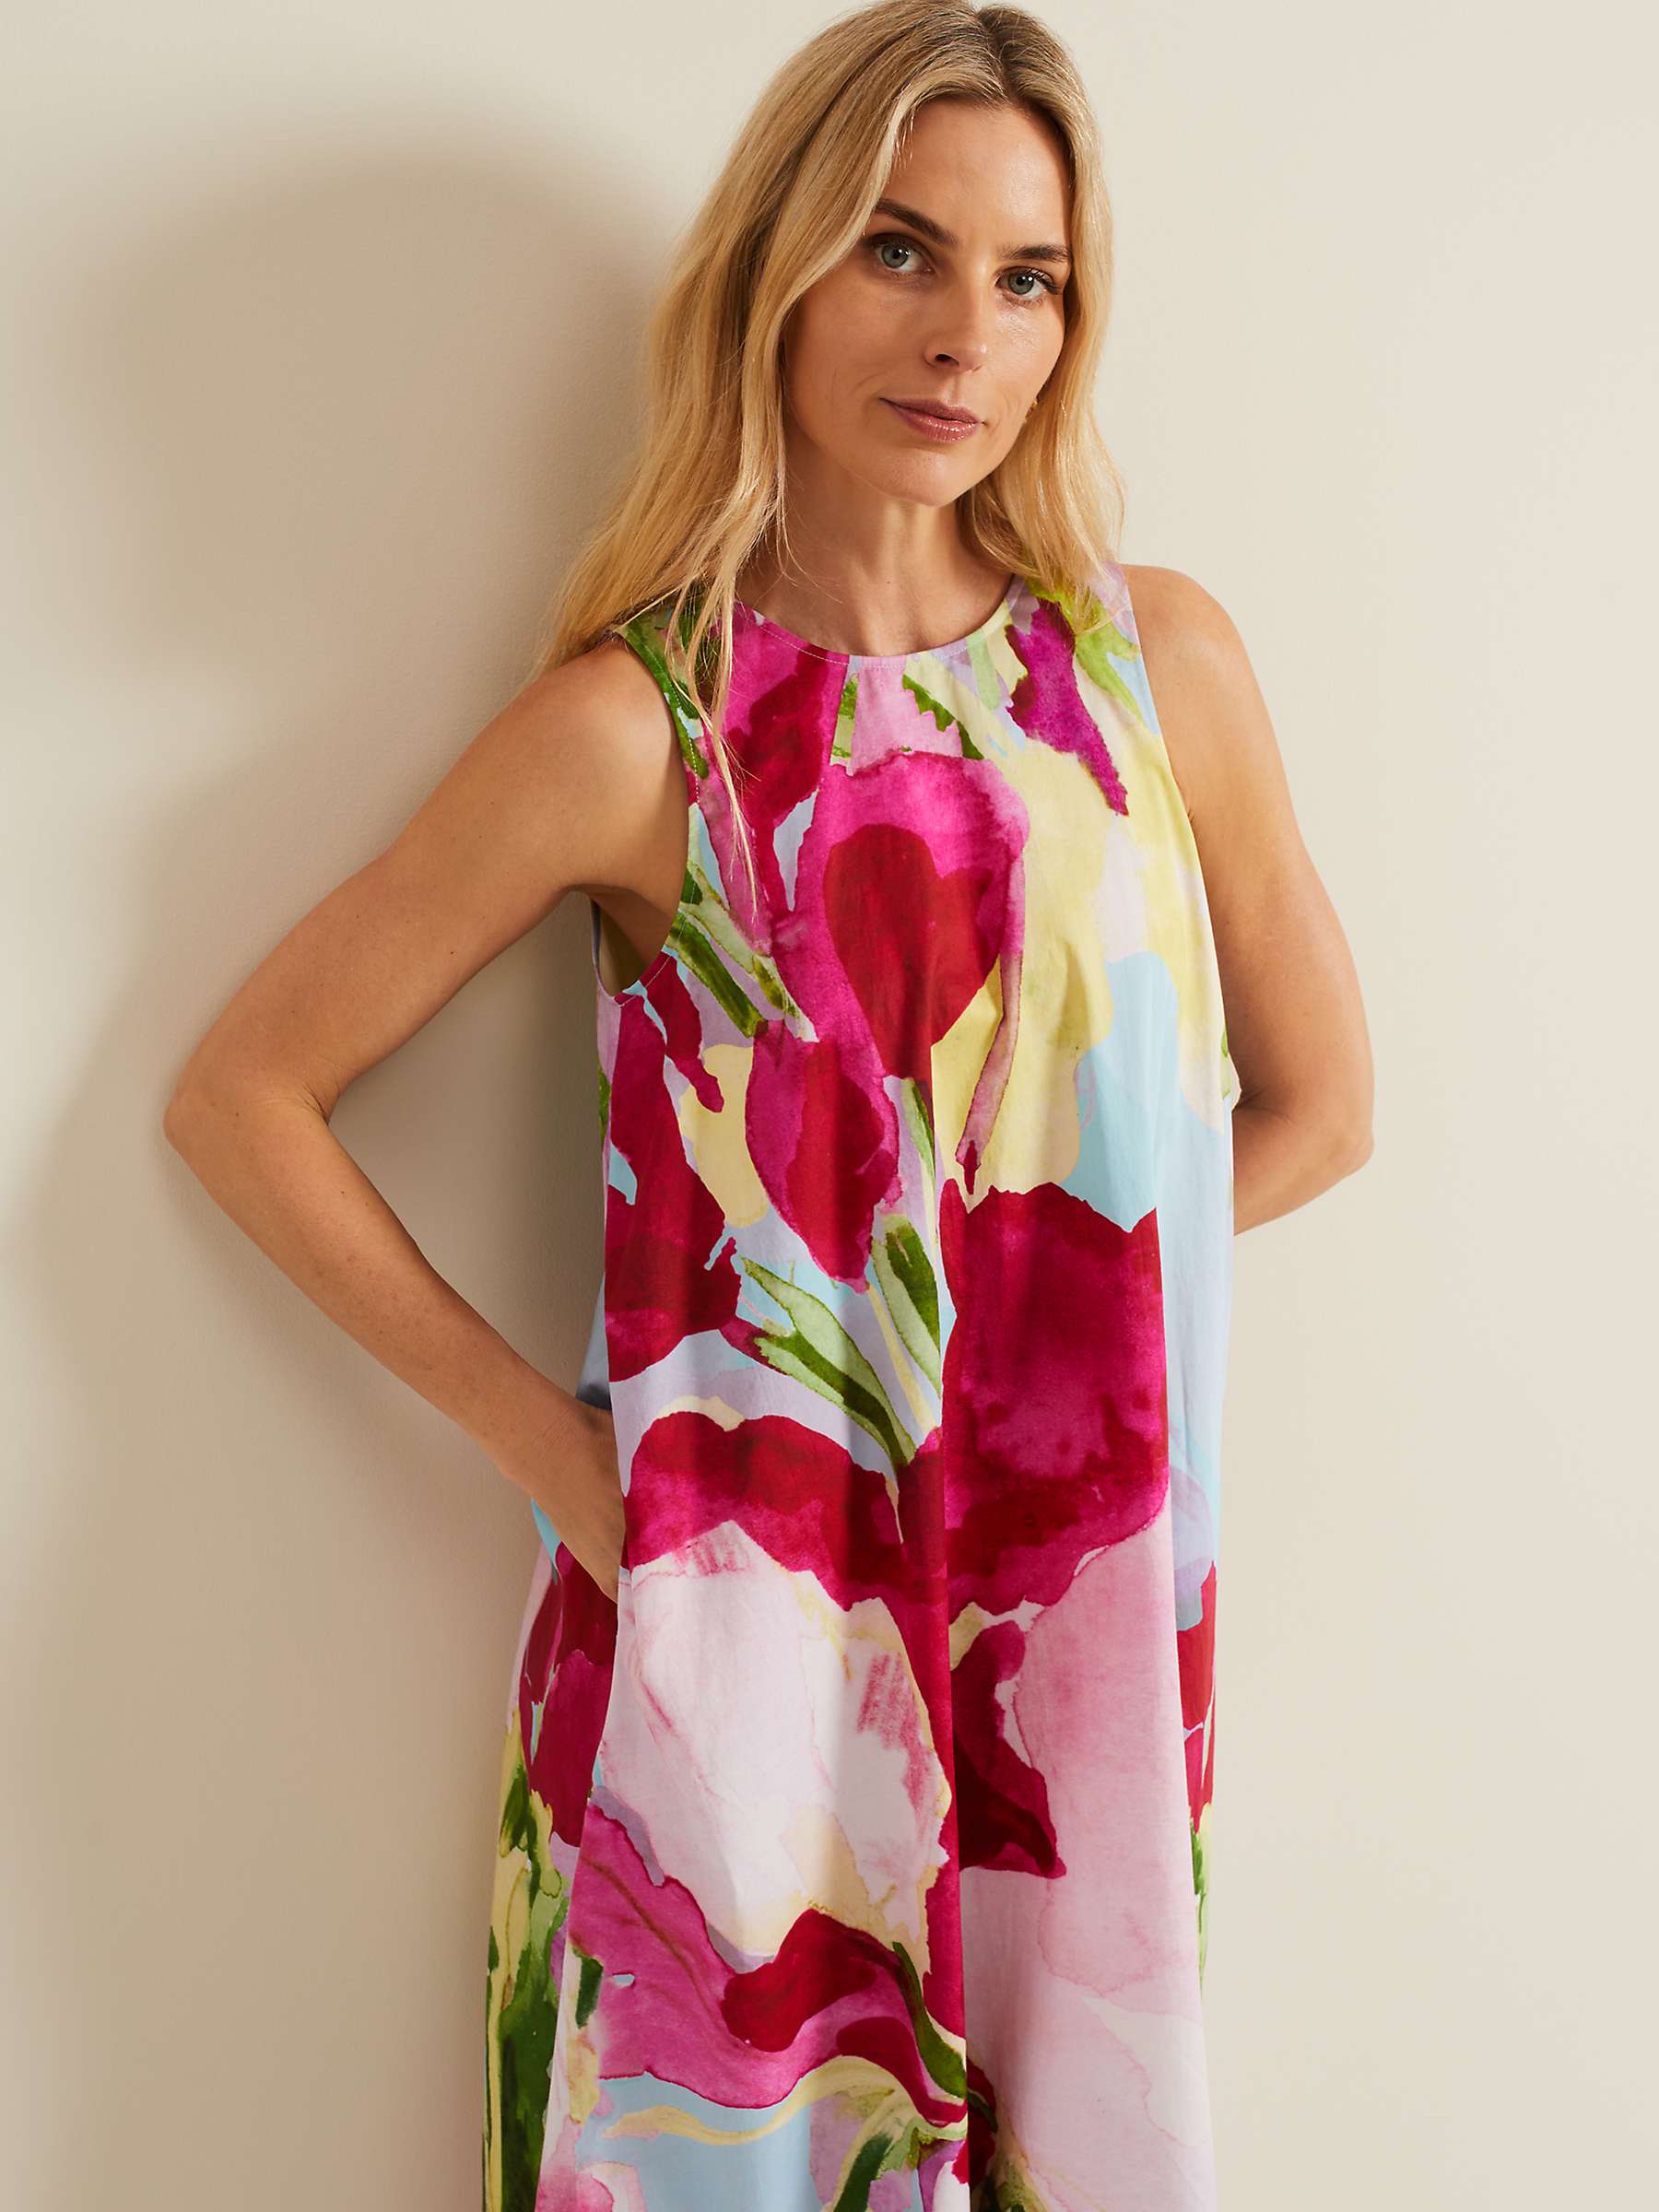 Buy Phase Eight Leila Cotton Floral Midi Dress, Pink/Multi Online at johnlewis.com